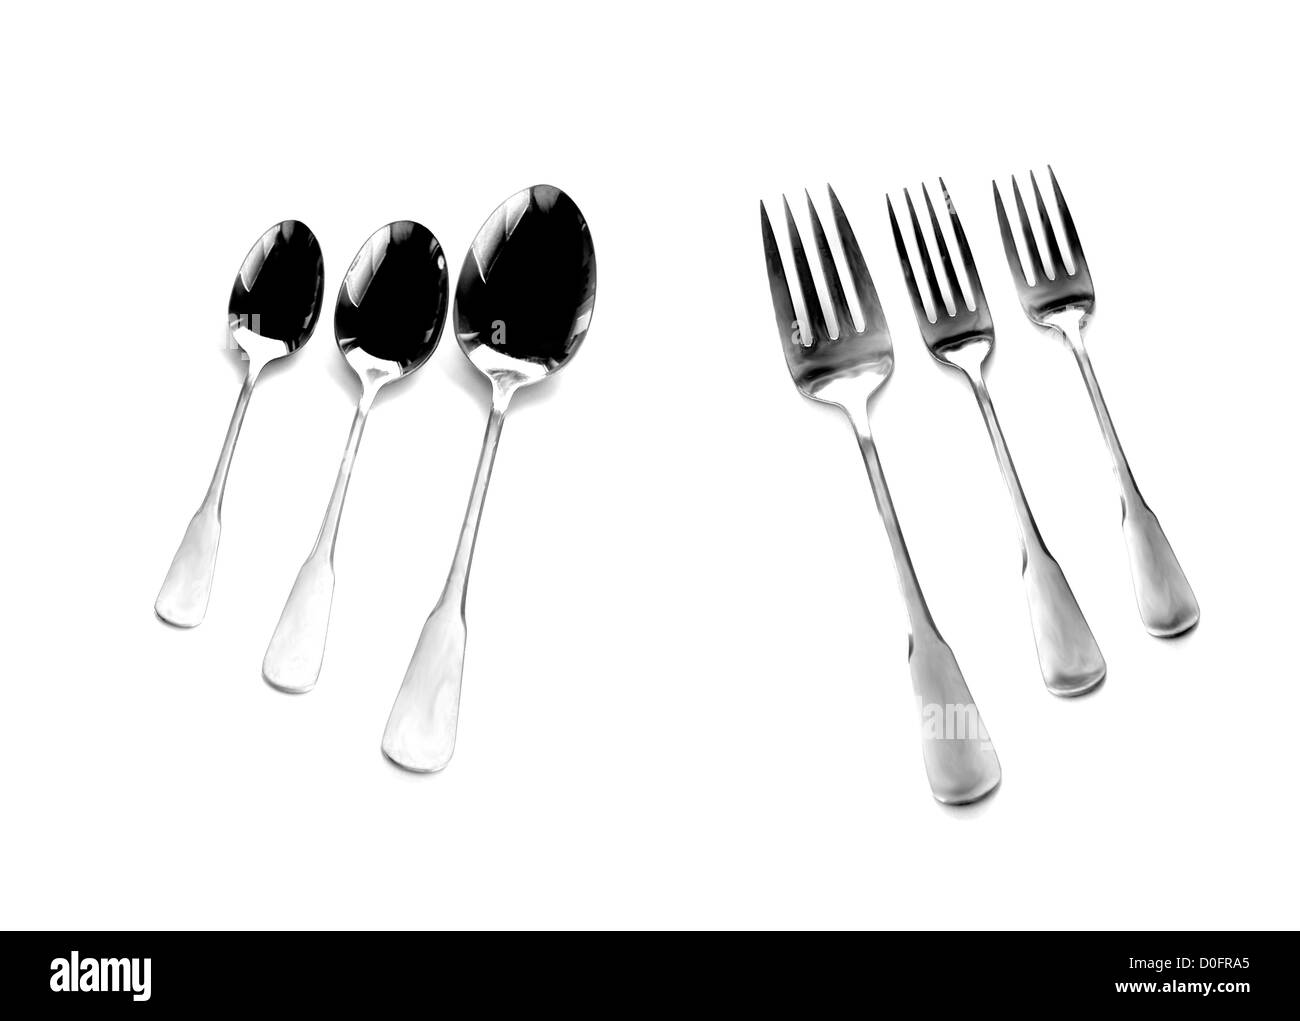 Silverware forks isolated on white background Stock Photo